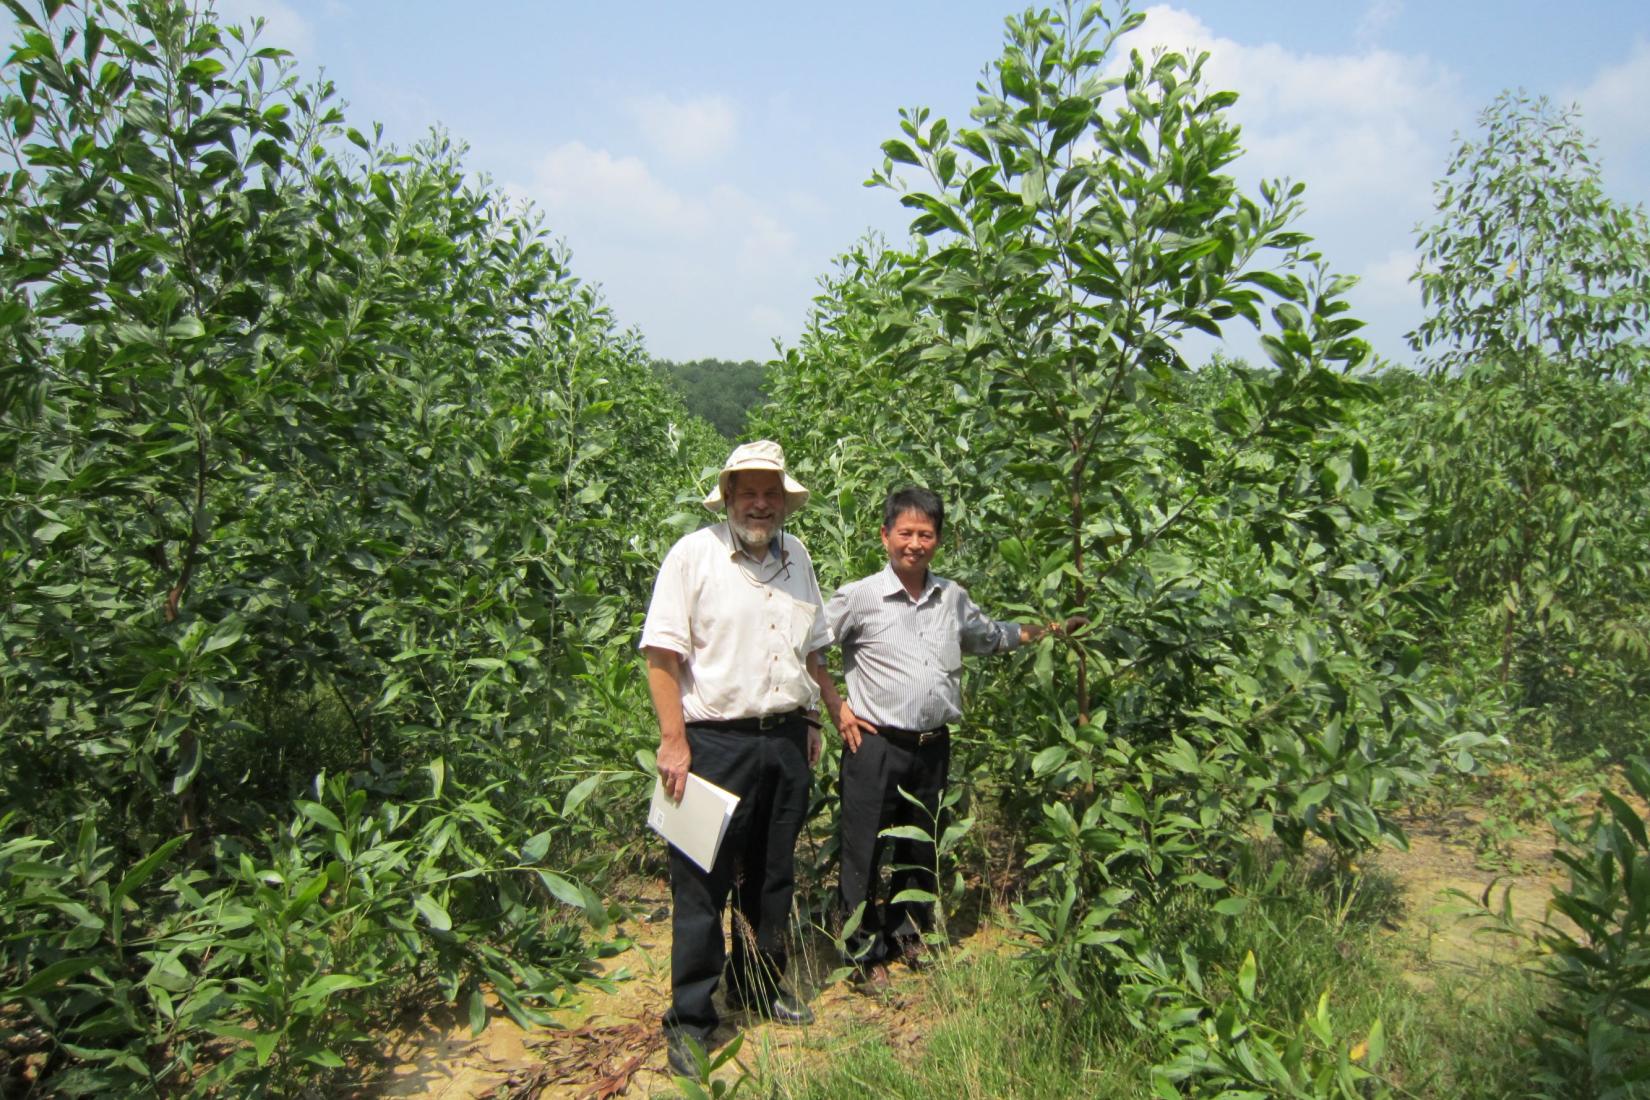 Two men smiling and standing amongst young trees